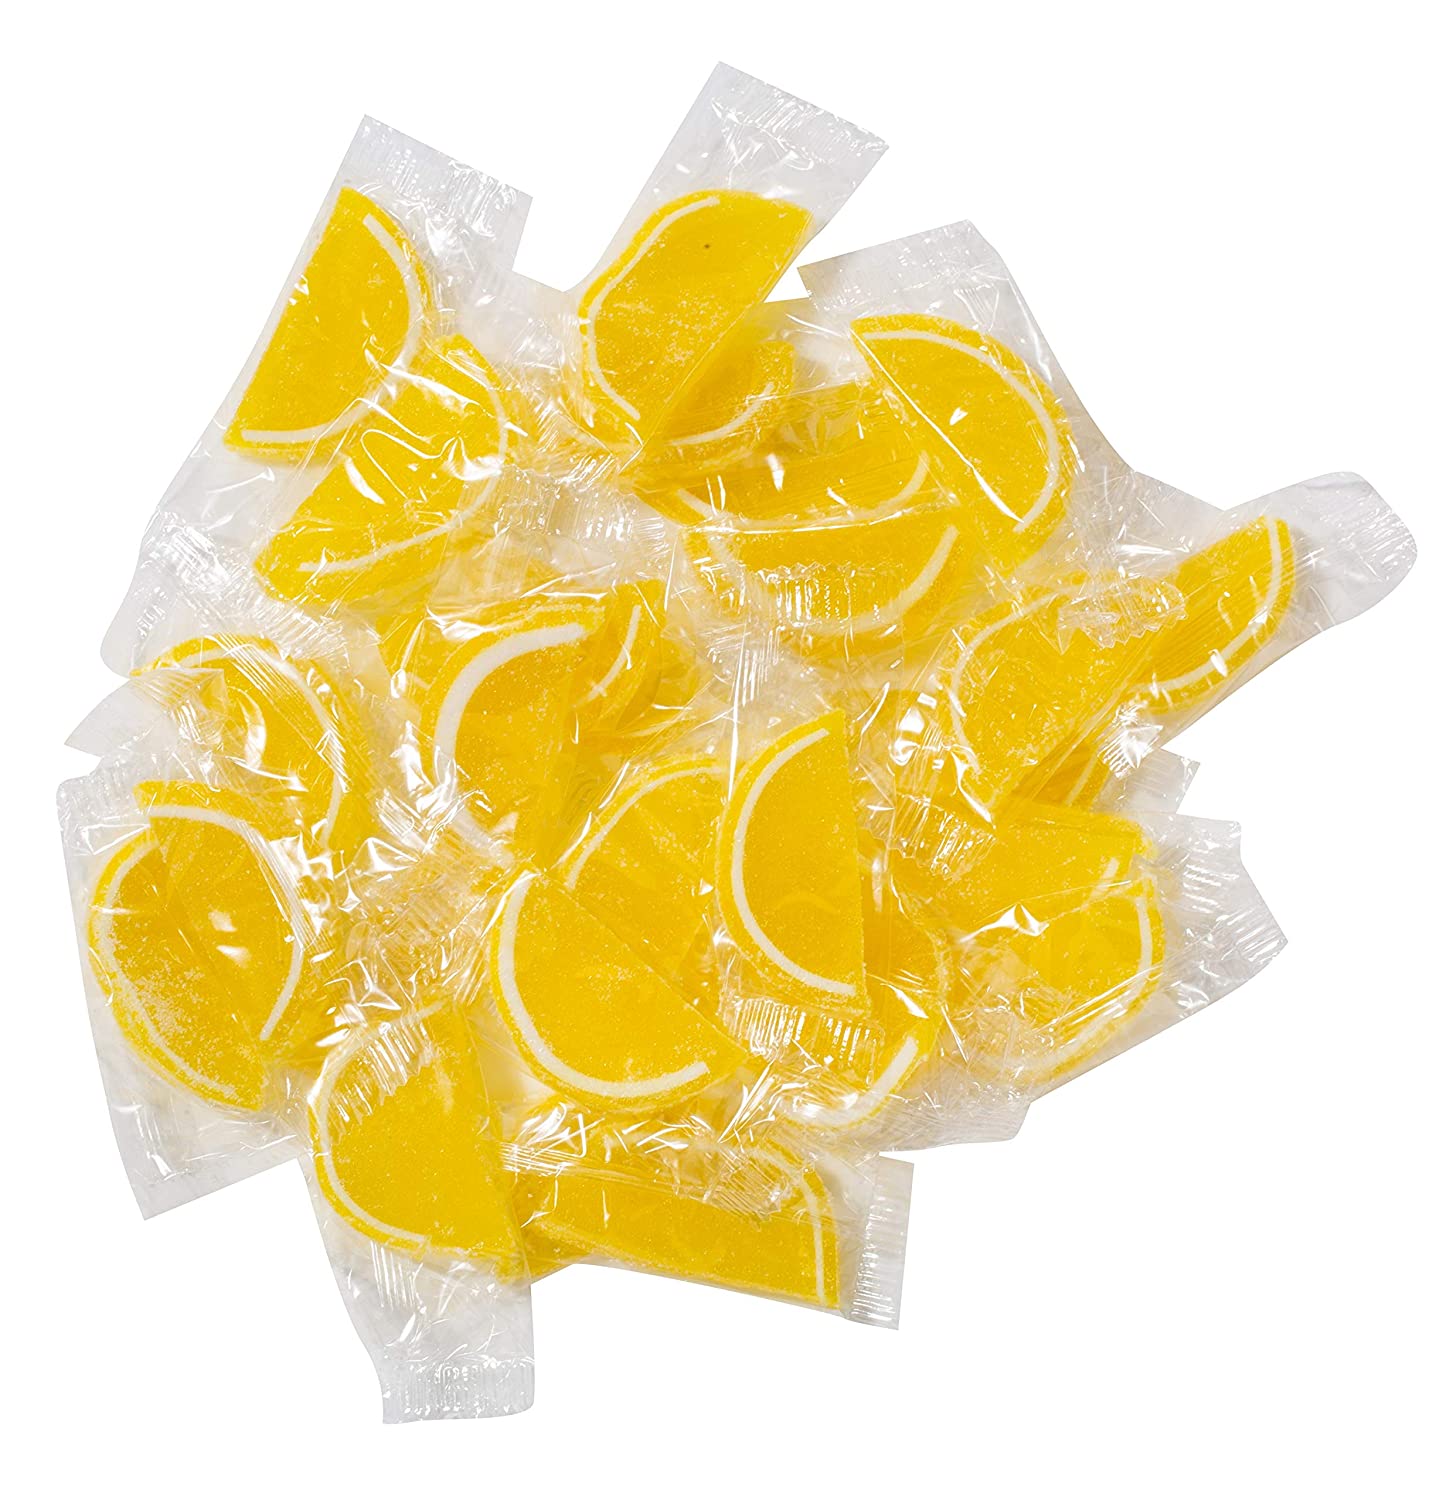 Sugar-Free Wrapped Fruit Slices Candy - 1 lb.